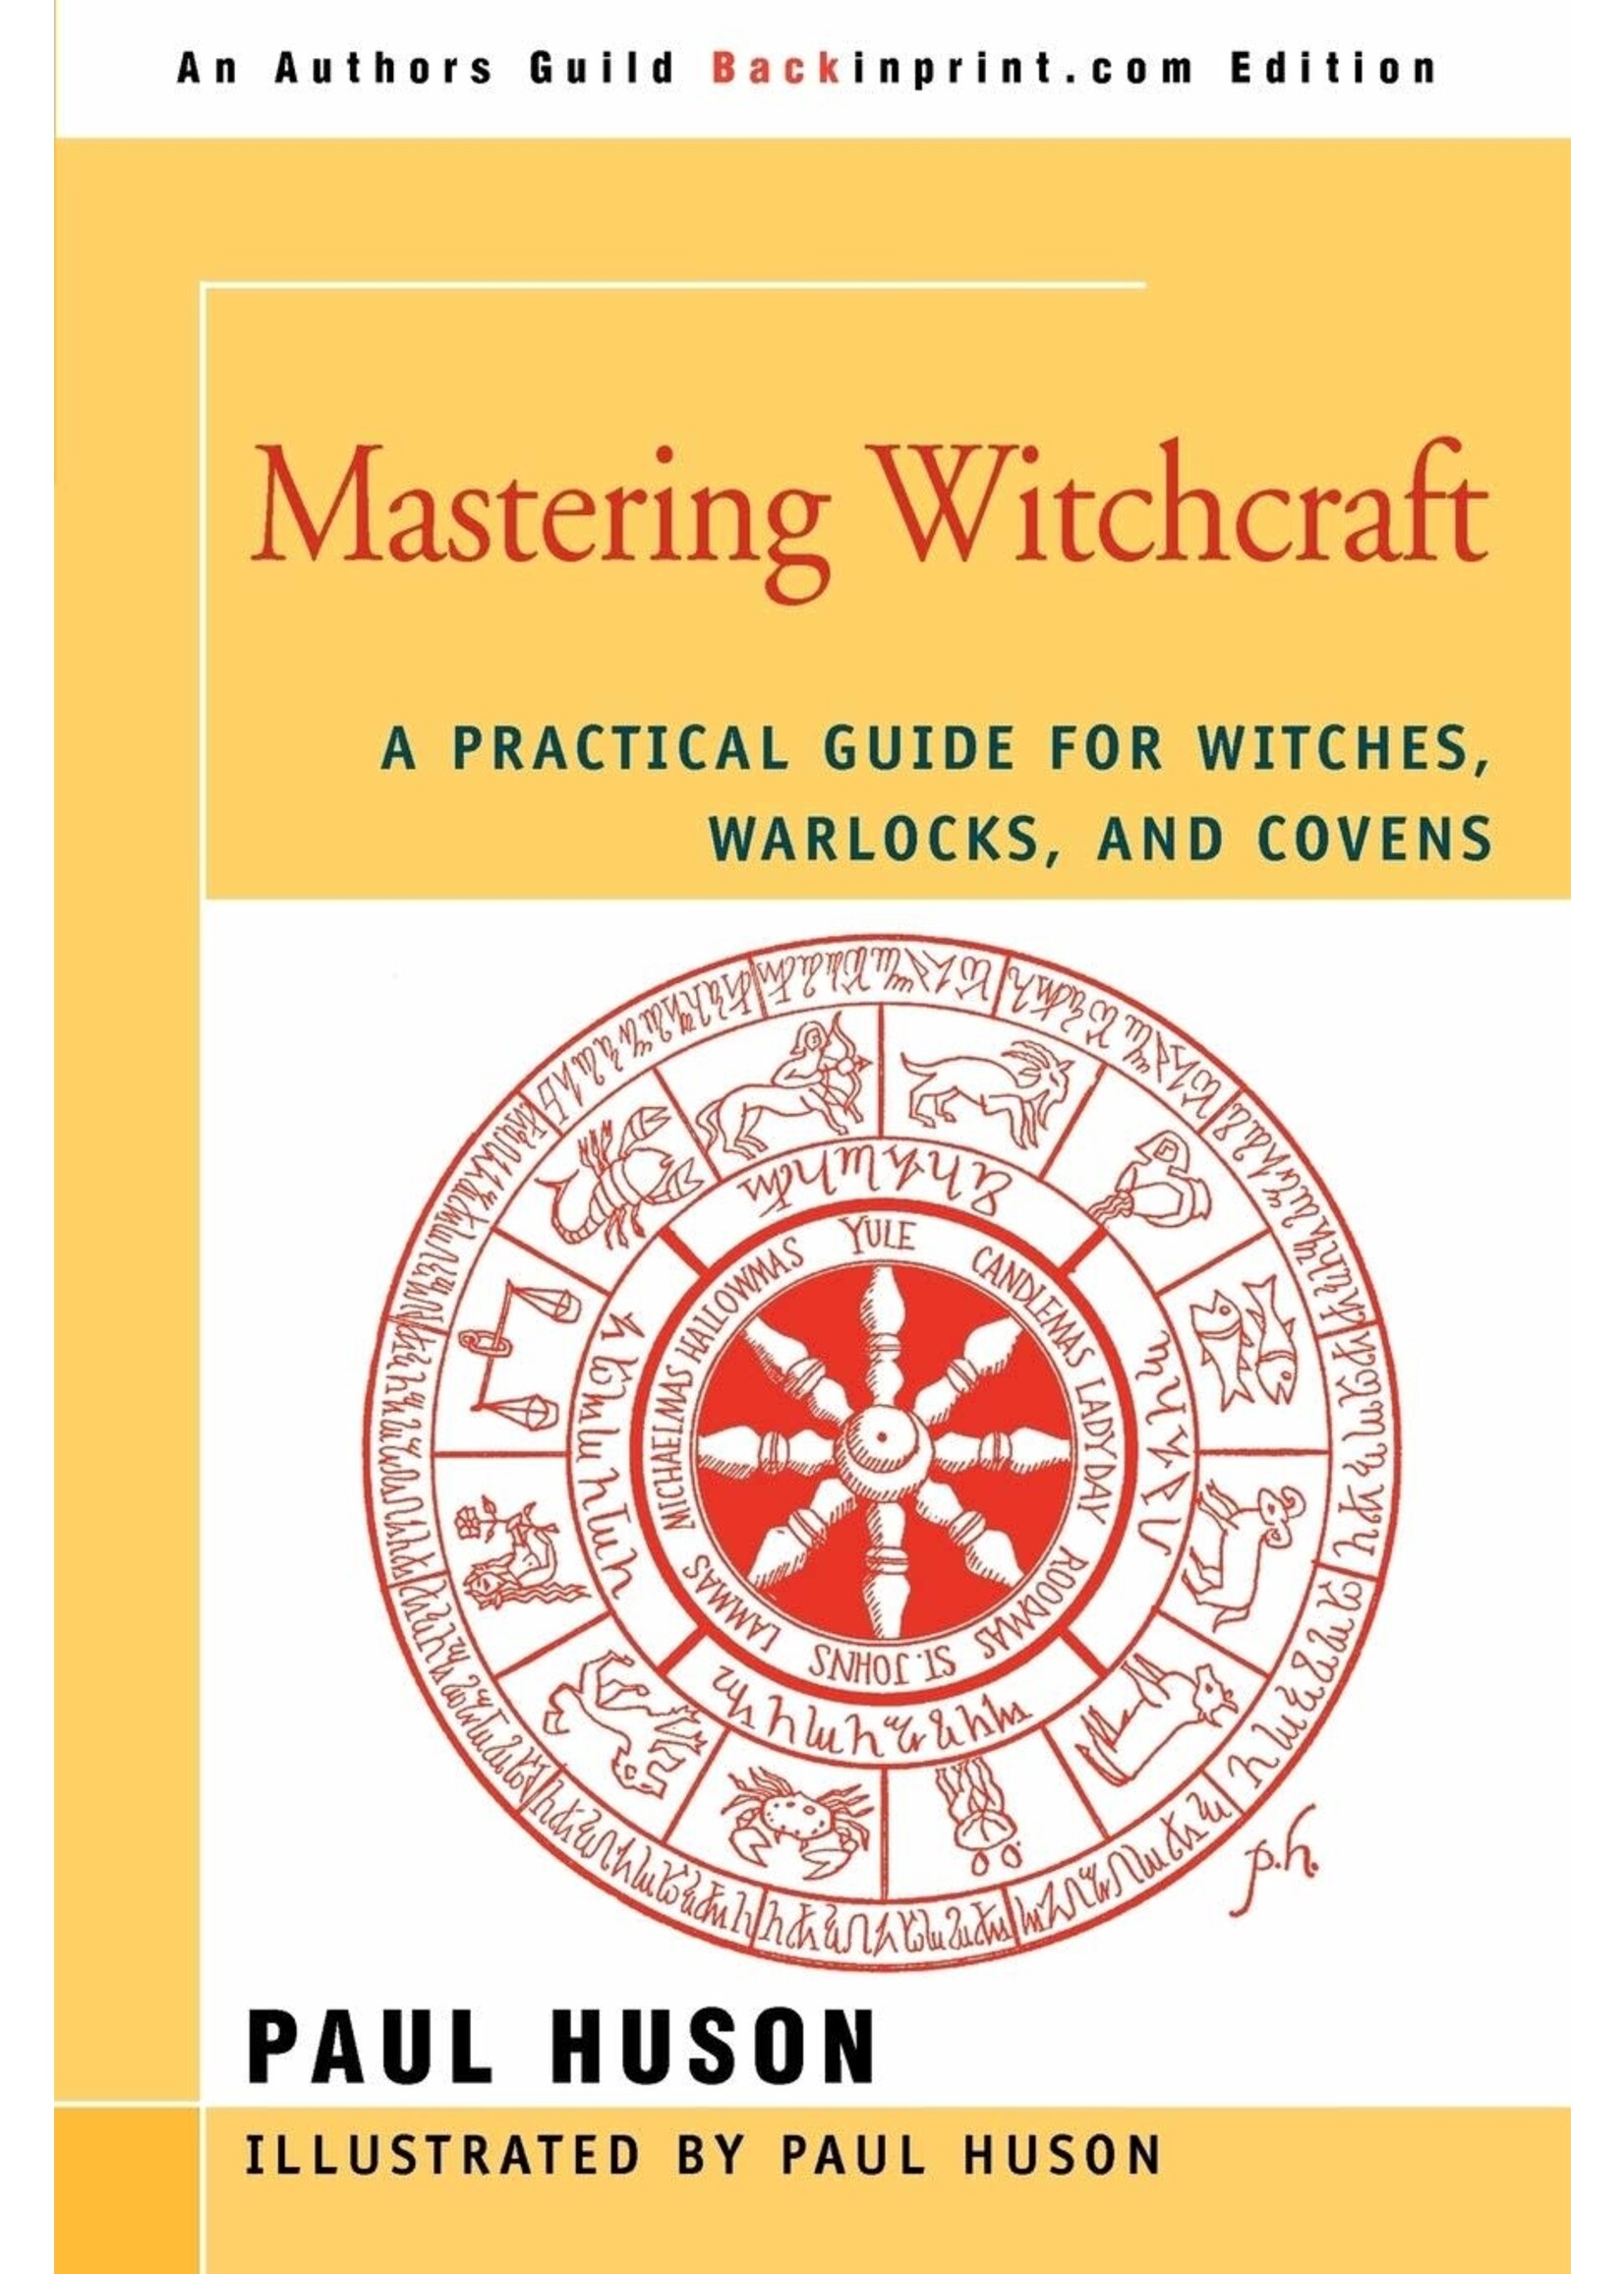 Mastering Witchcraft by Paul Huson